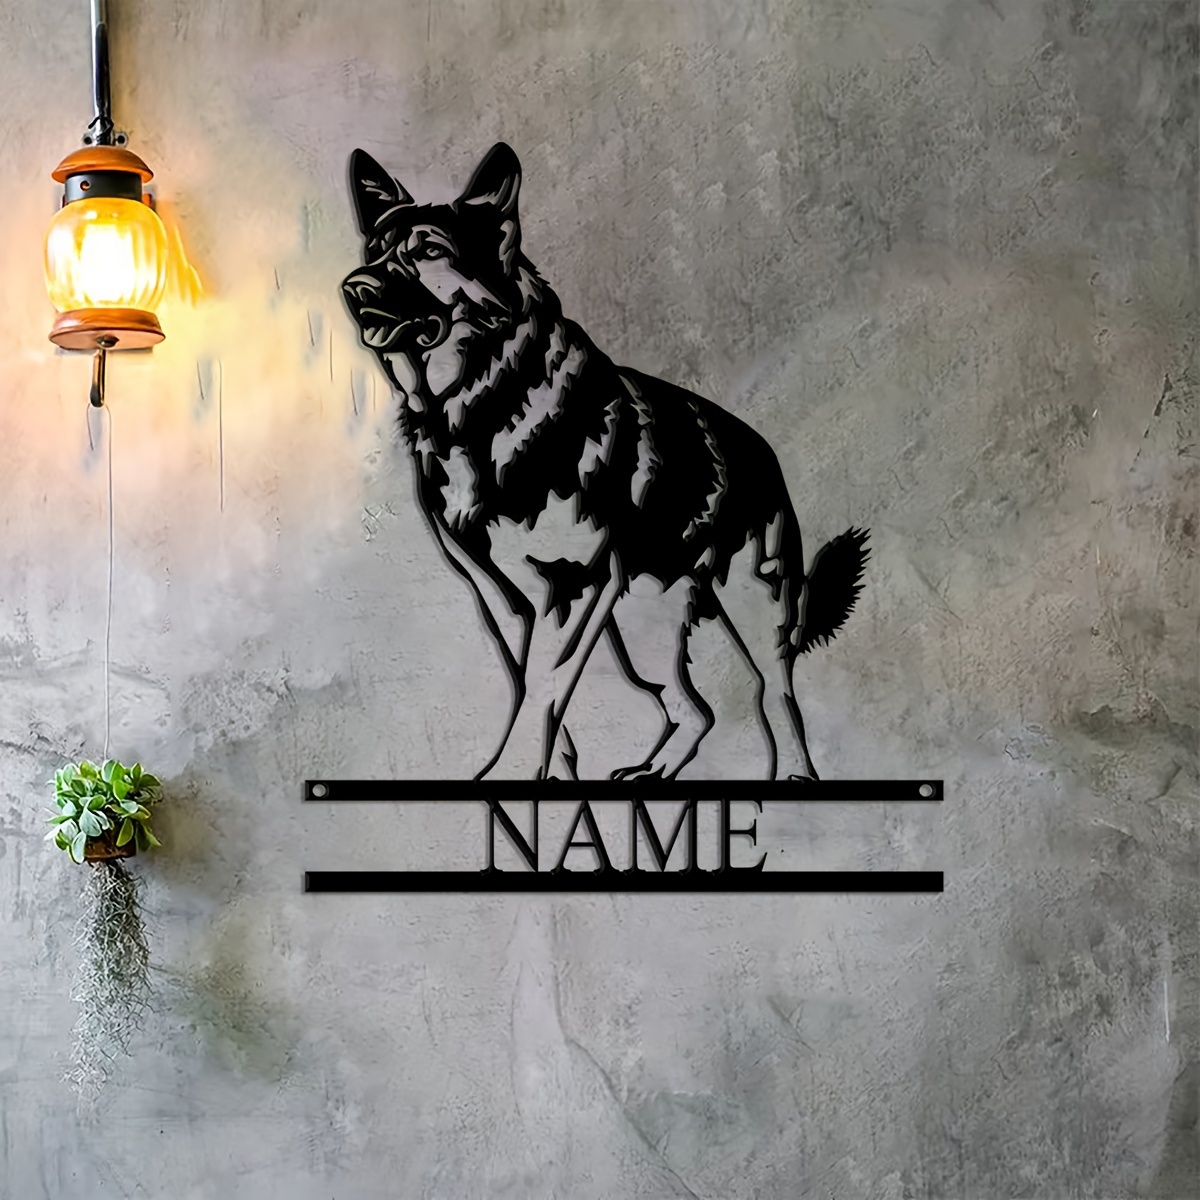 

Custom German Shepherd Metal Wall Art - Personalized Dog Lover Name Sign For Home Decor, Perfect Gift Idea